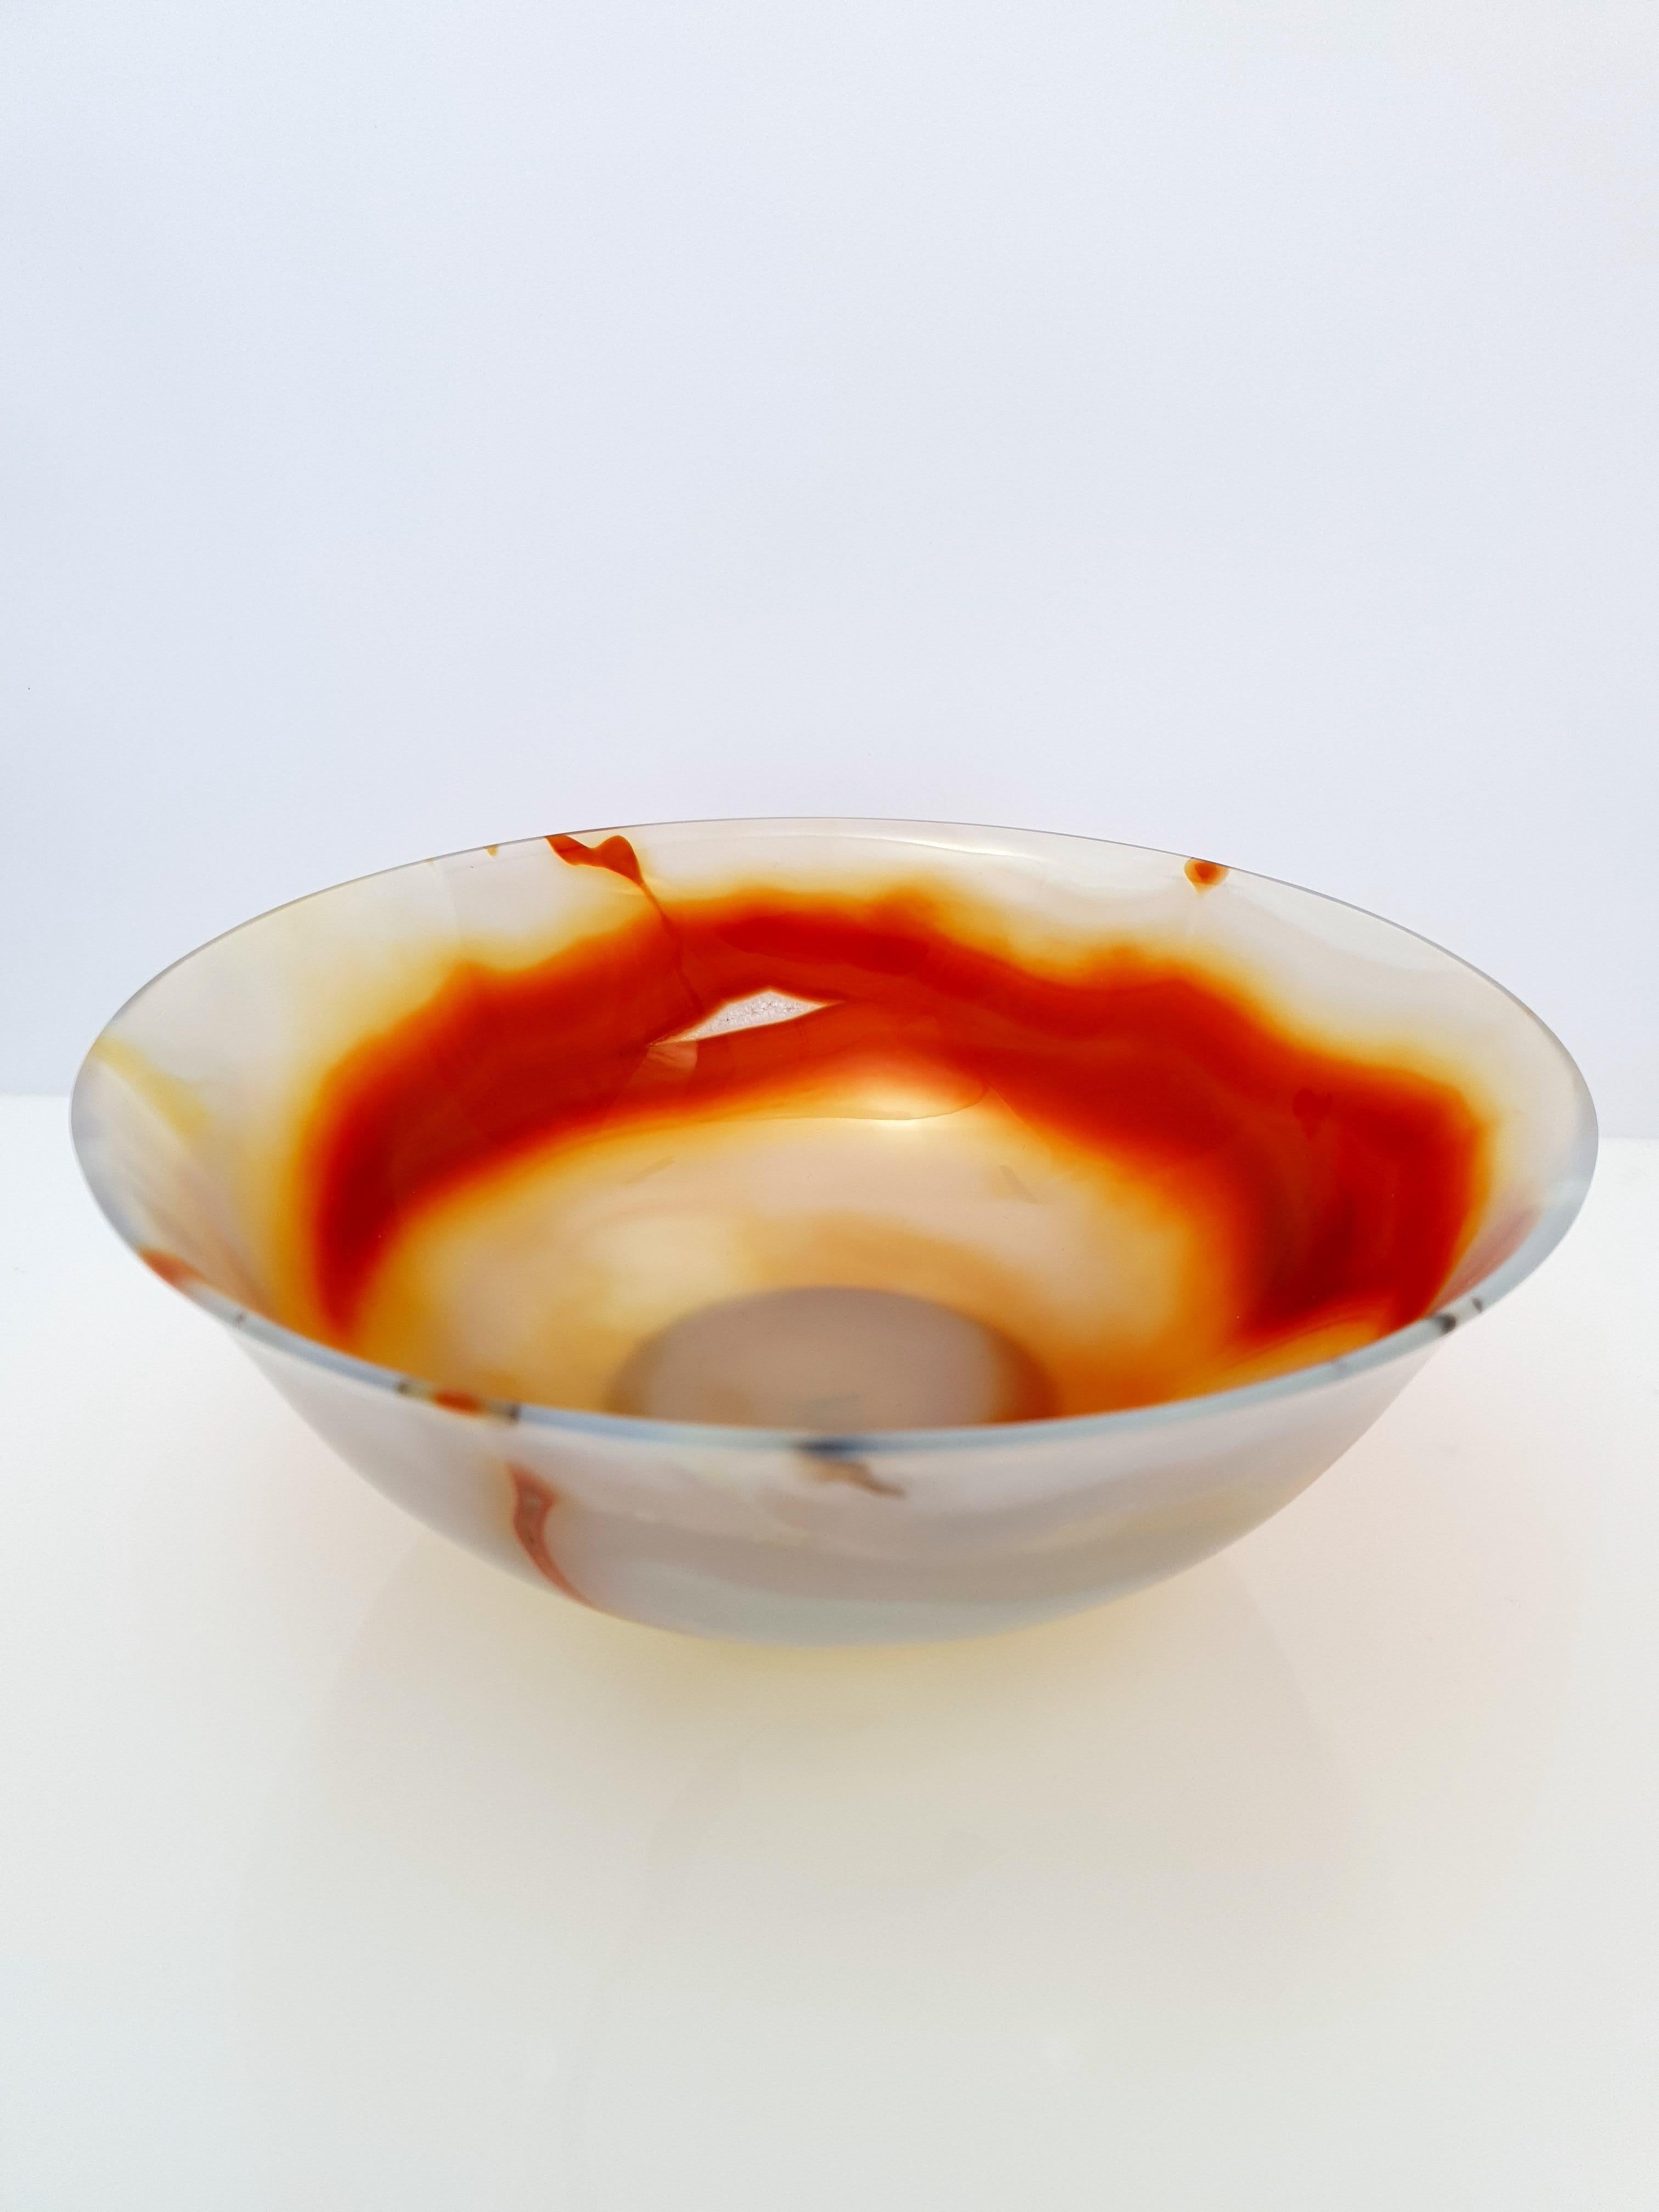 A Natural Handmade Red Orange Banded Agate Bowl.
The bowl is cut so thin that the material is translucent.

It's a great piece for decoration on a desk, vanity, or even as a special gift.
diameter: 7 1/2 inch.